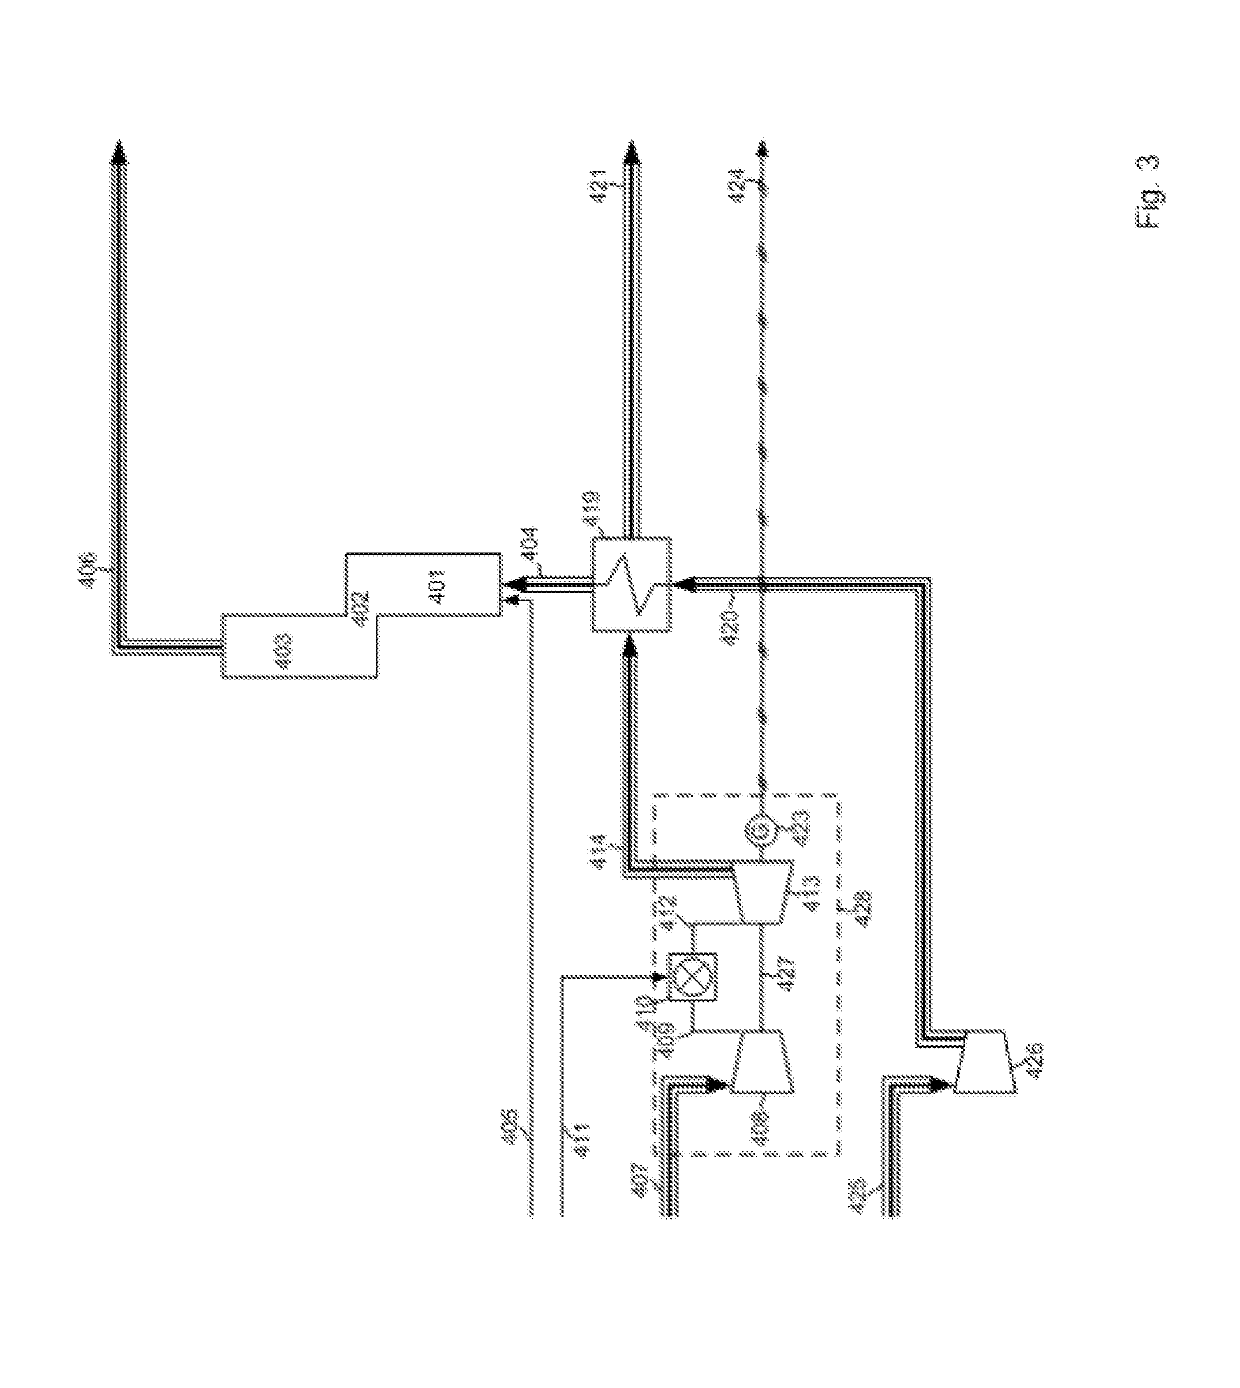 Process for cracking hydrocarbon stream using flue gas from gas turbine